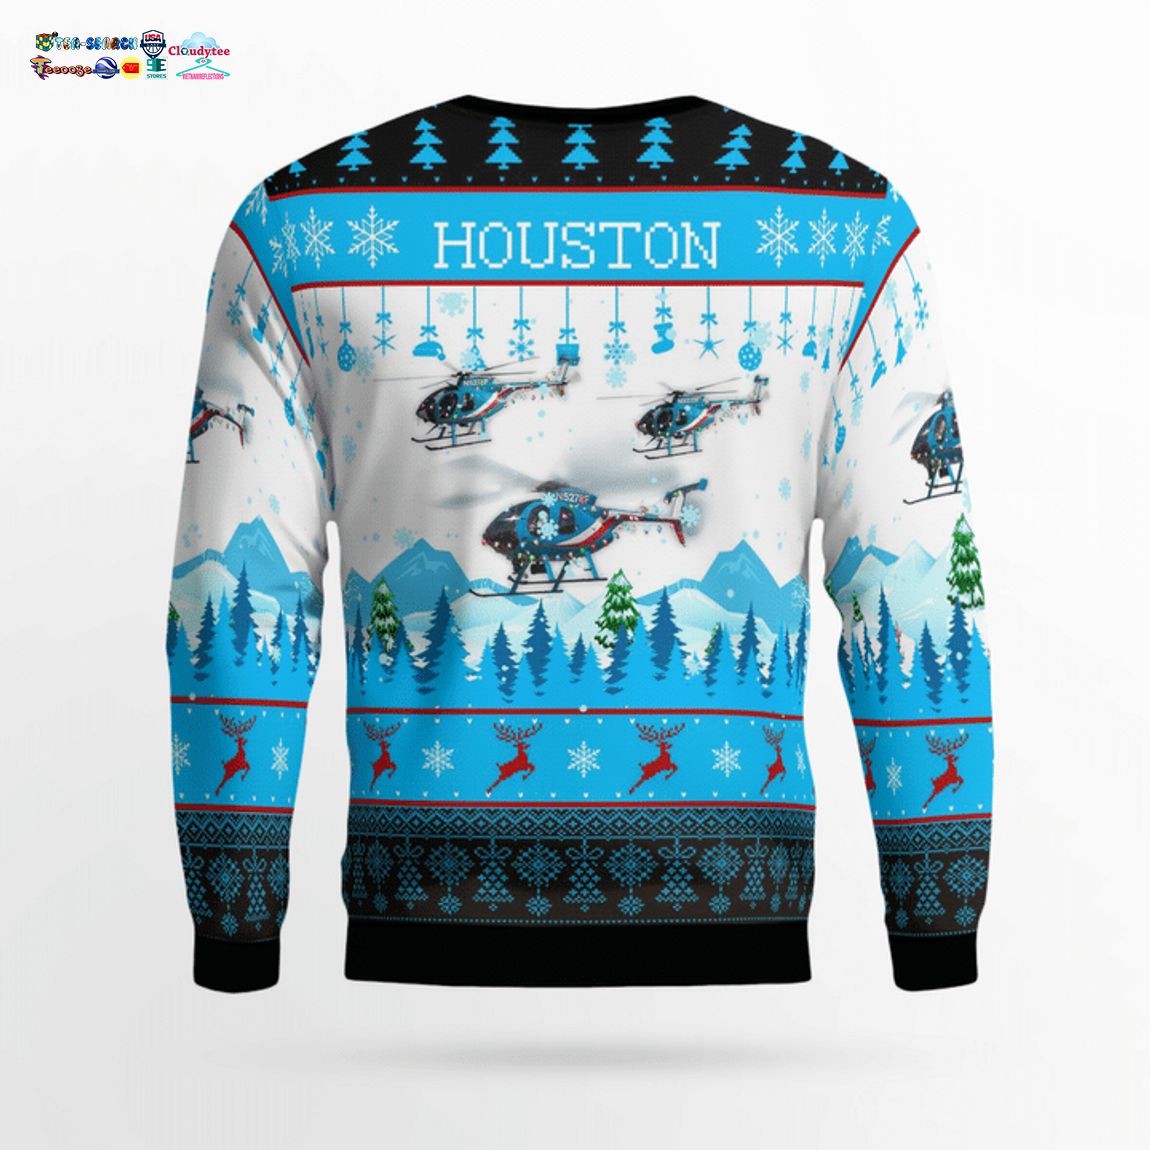 Houston Police Helicopter 78F N5278F 3D Christmas Sweater - Saleoff